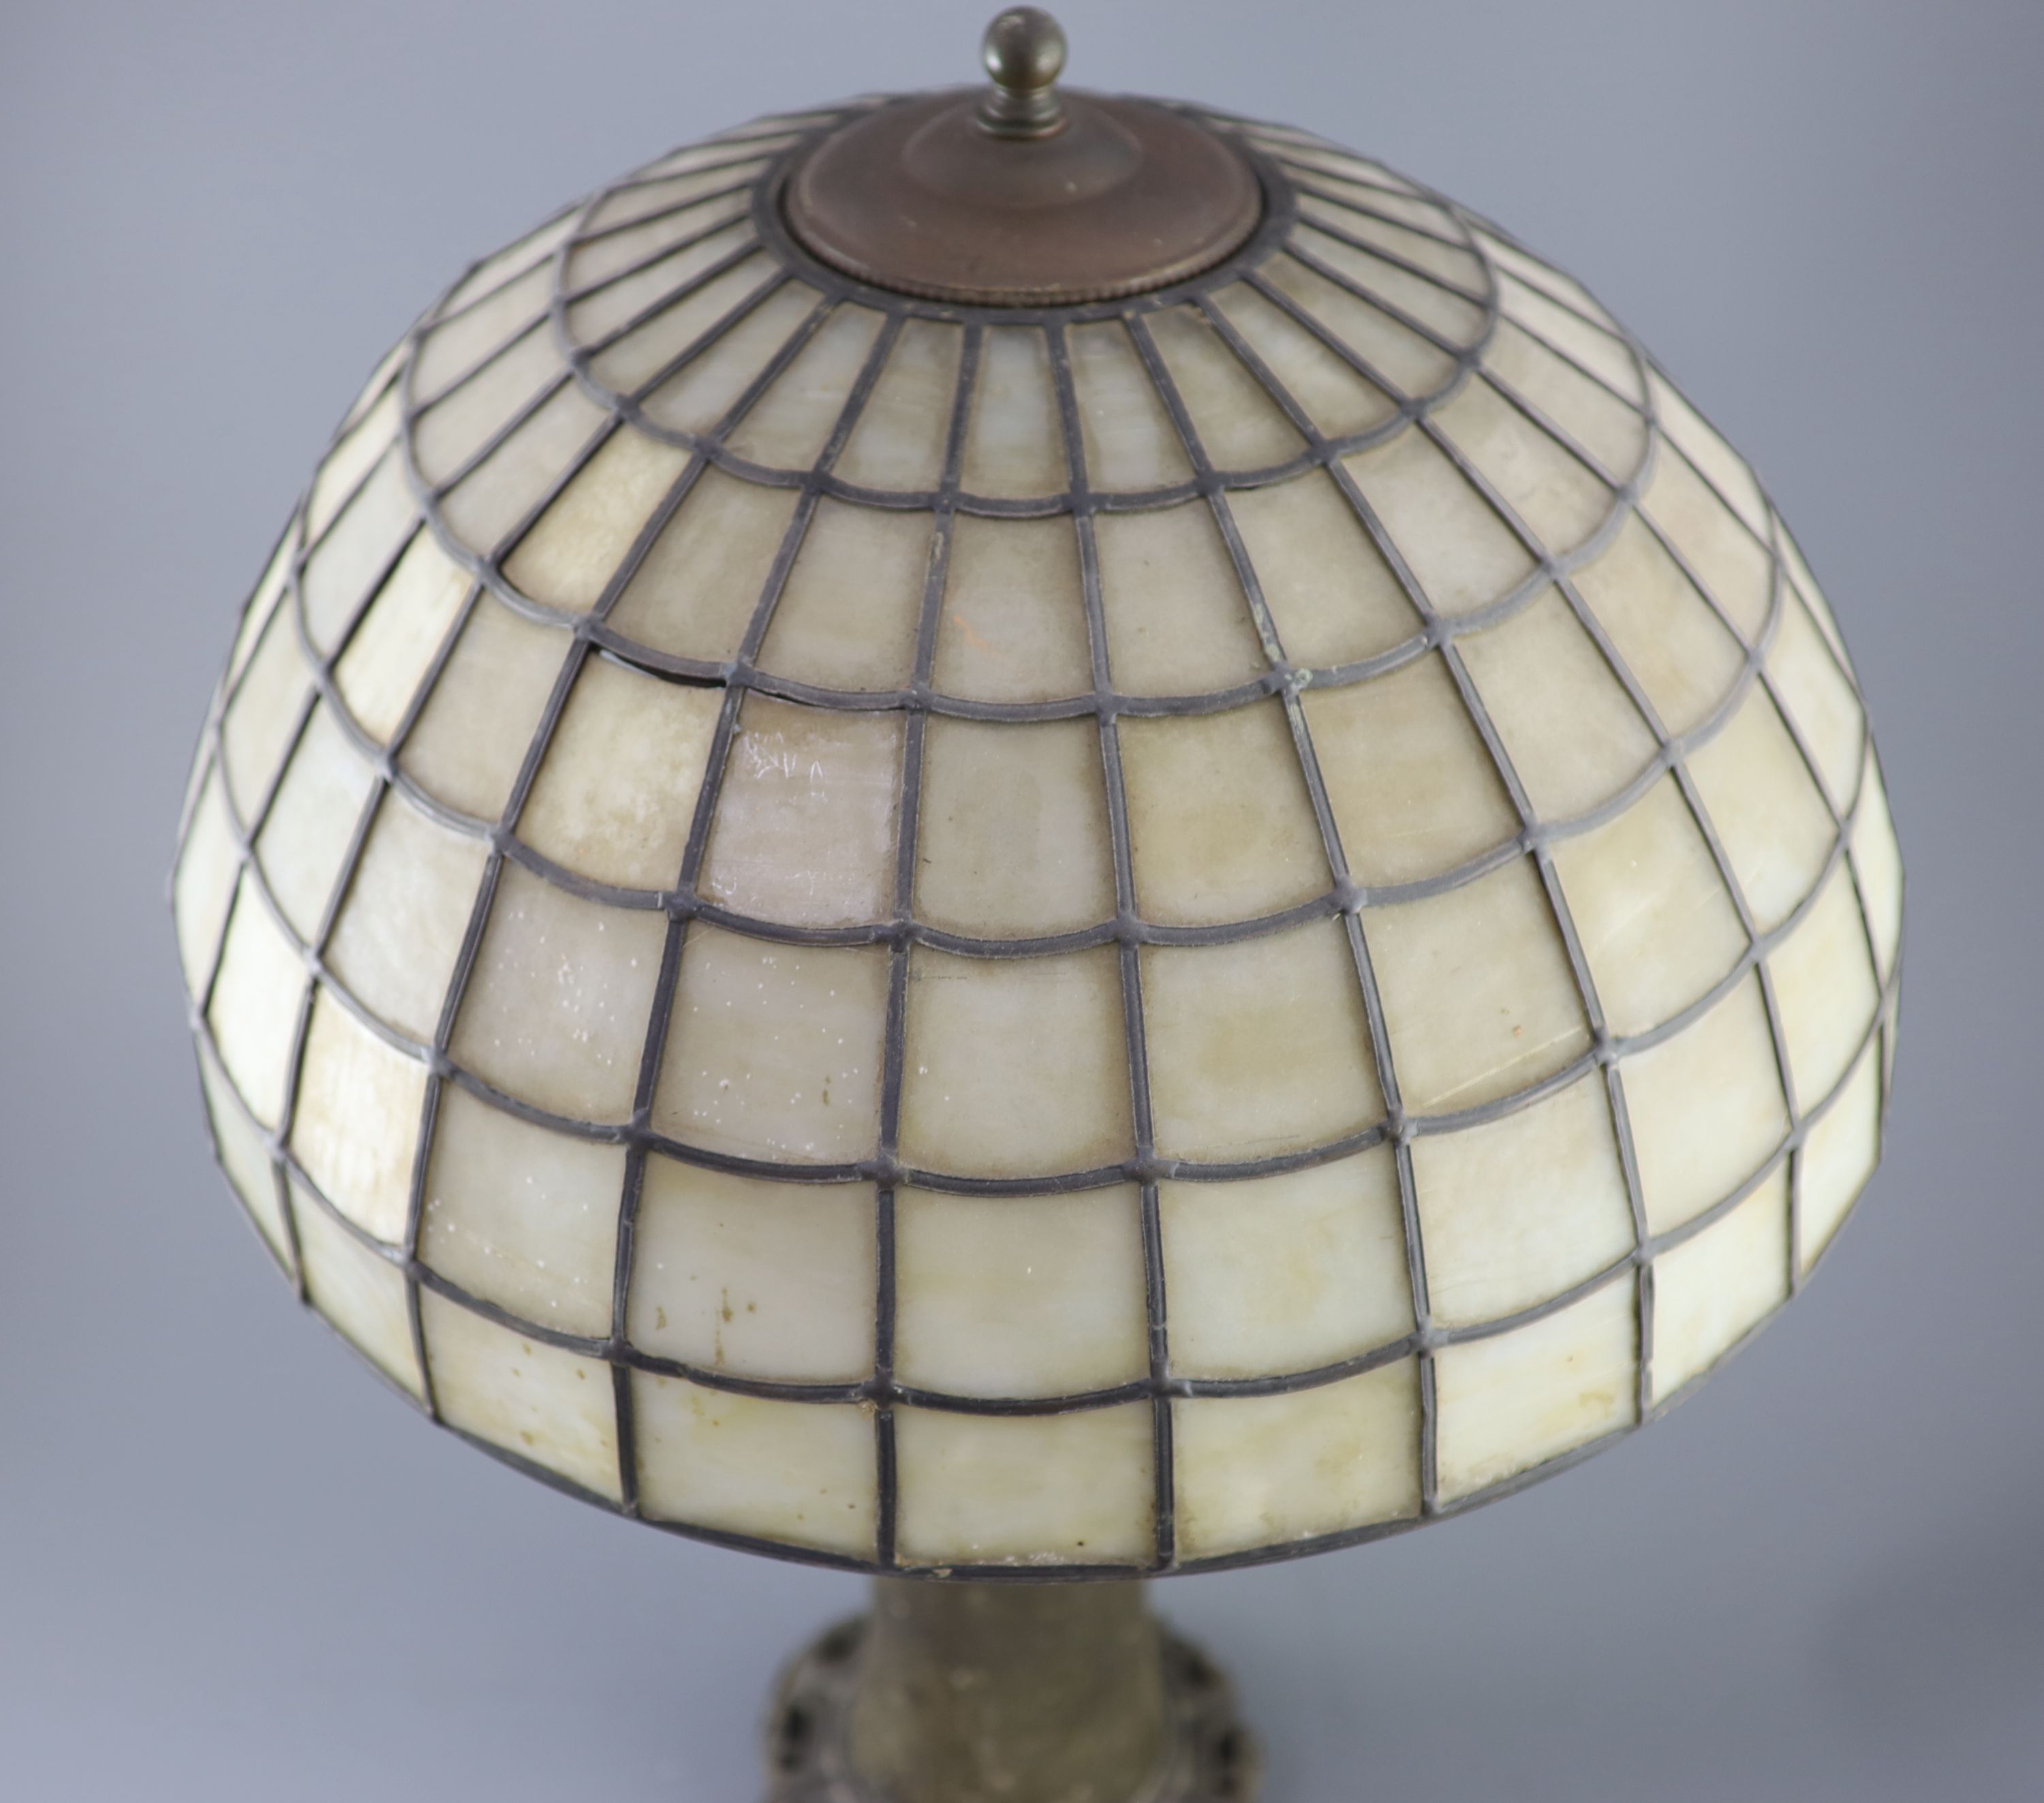 An early 20th century Tiffany style bronze table lamp, by Handel, diameter 20.1in. height 25in.